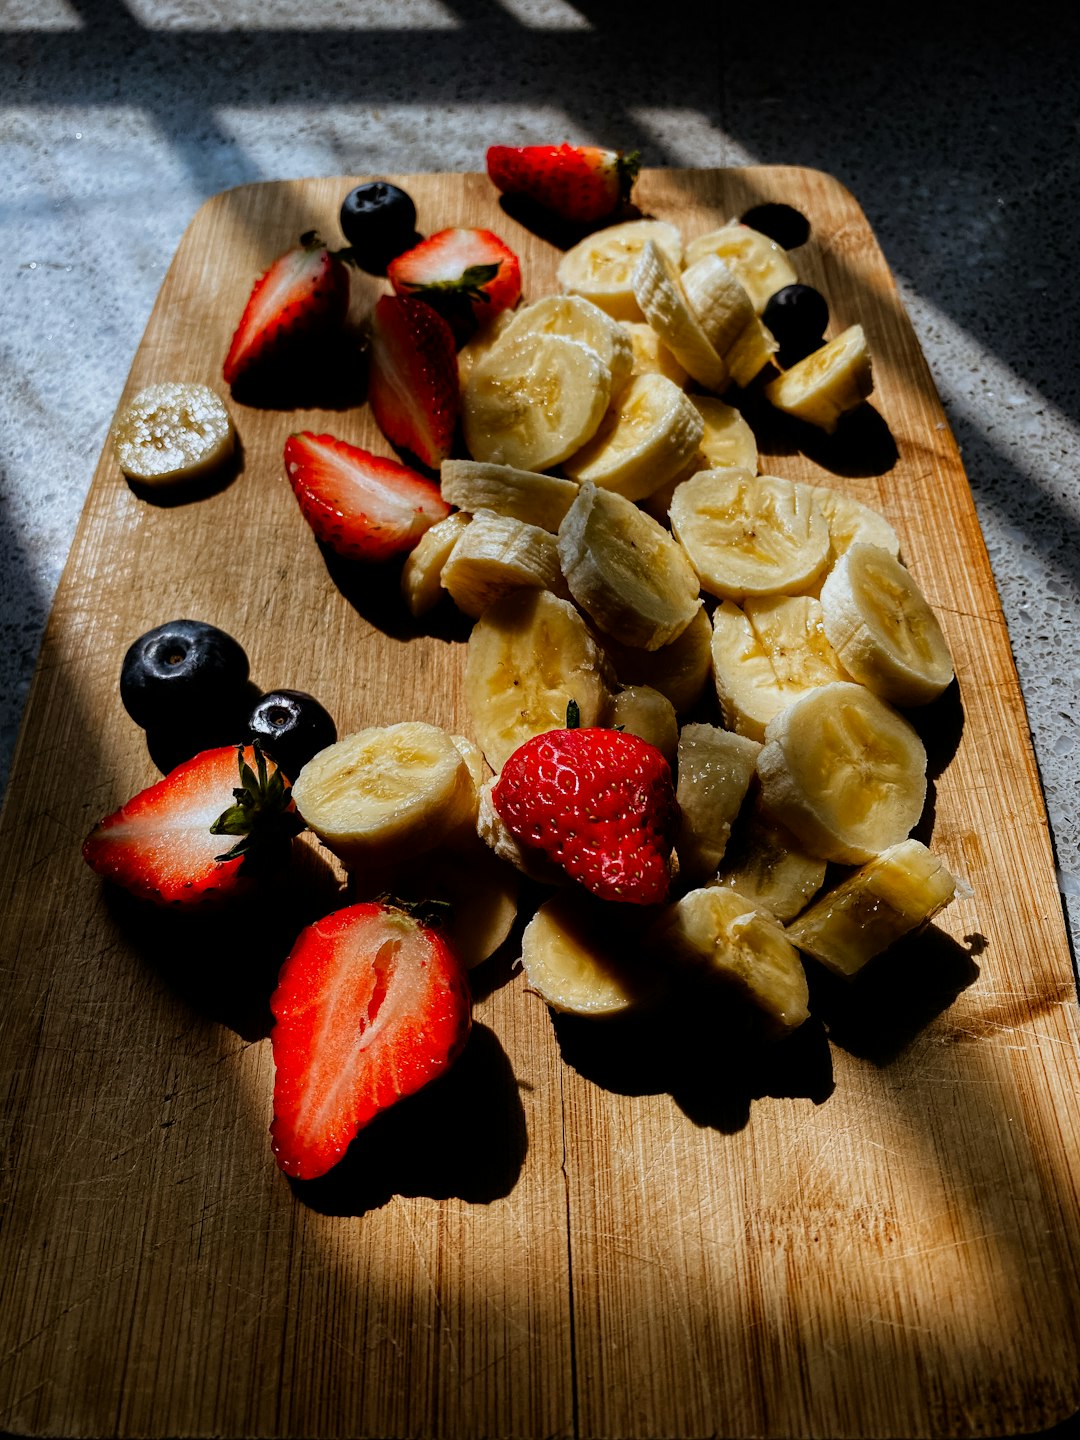 sliced apple and red fruit on brown wooden chopping board